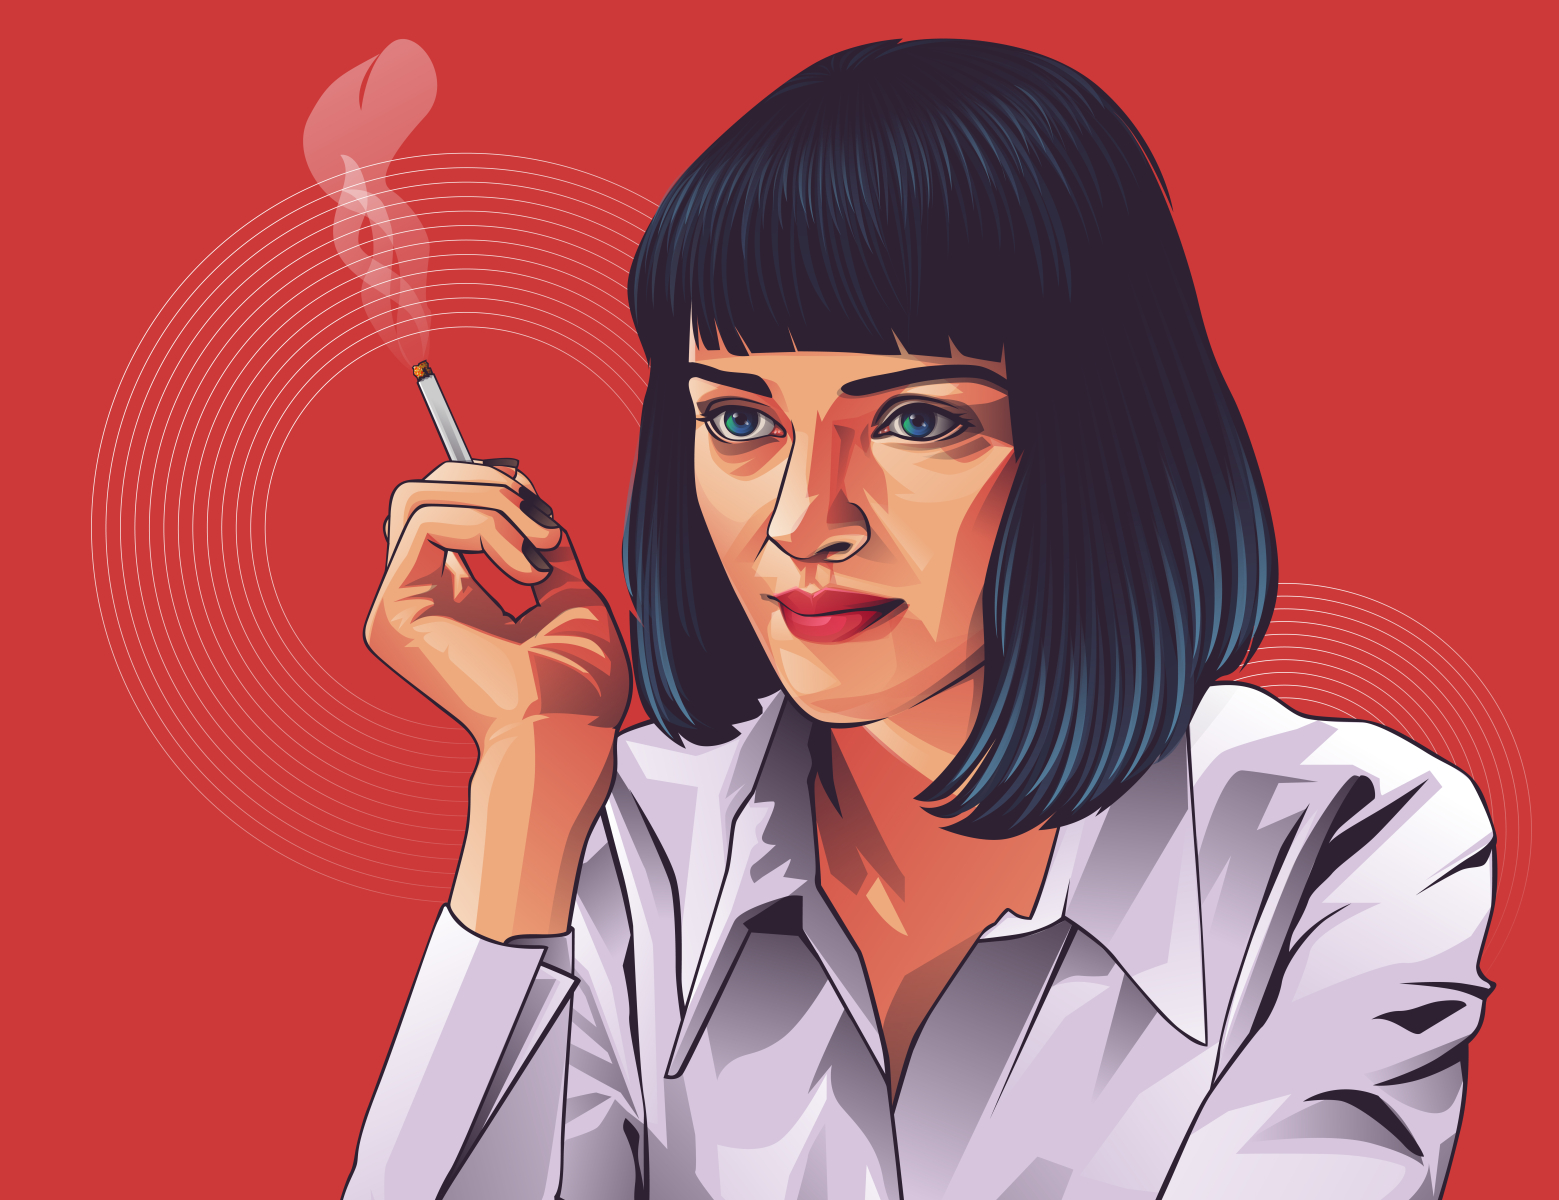 pulp fiction by pulp fiction on Dribbble